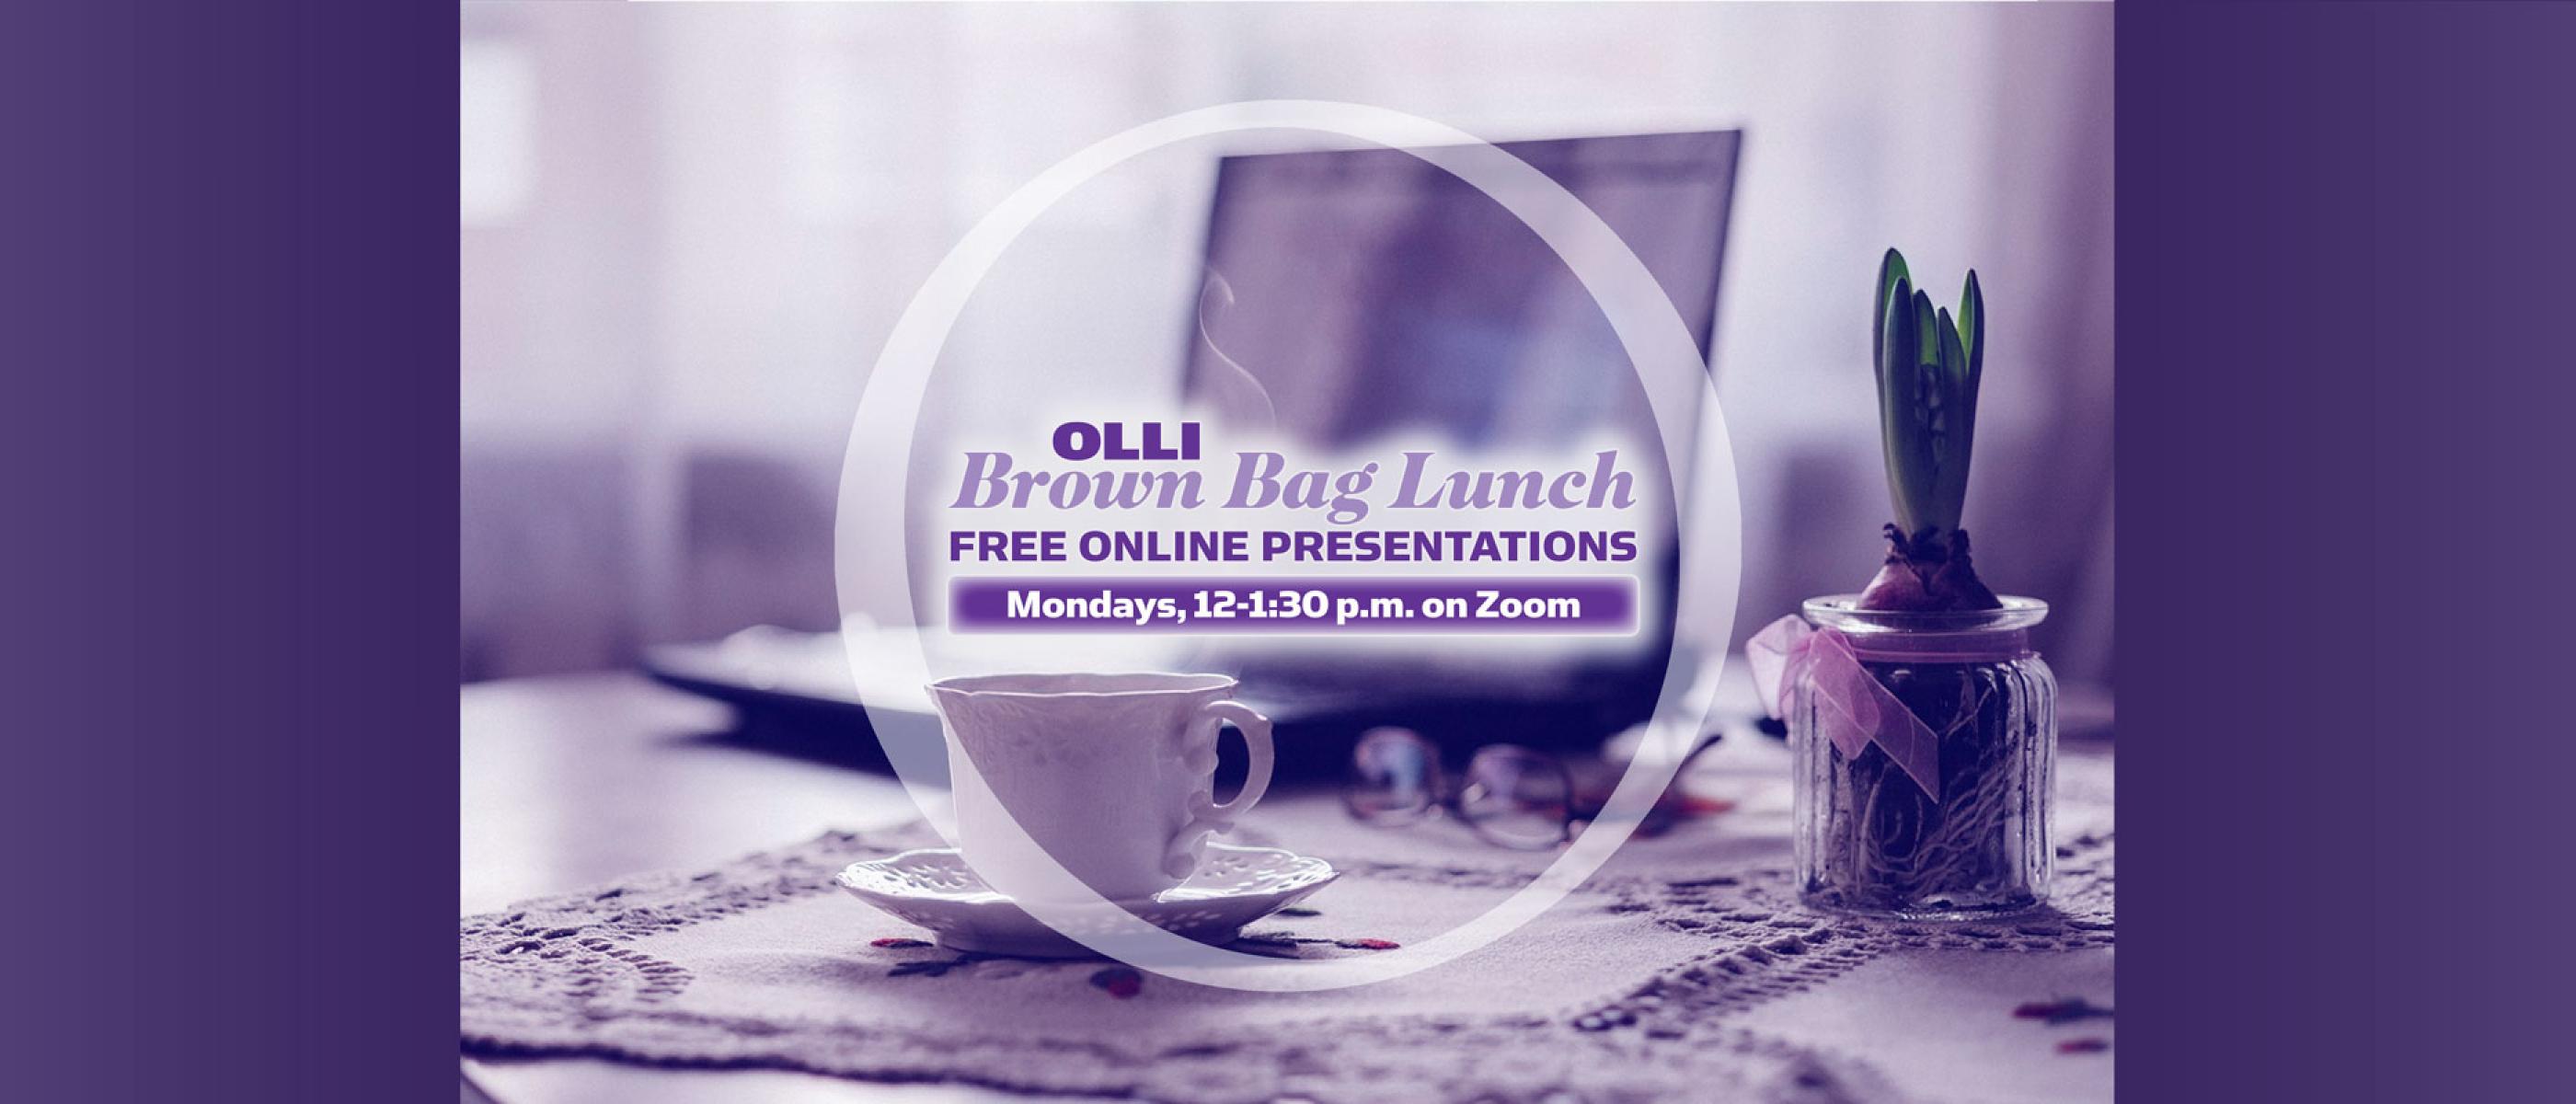 OLLI Brown Bag Lunch Free Online Presentations - Mondays, noon-1:30, on Zoom